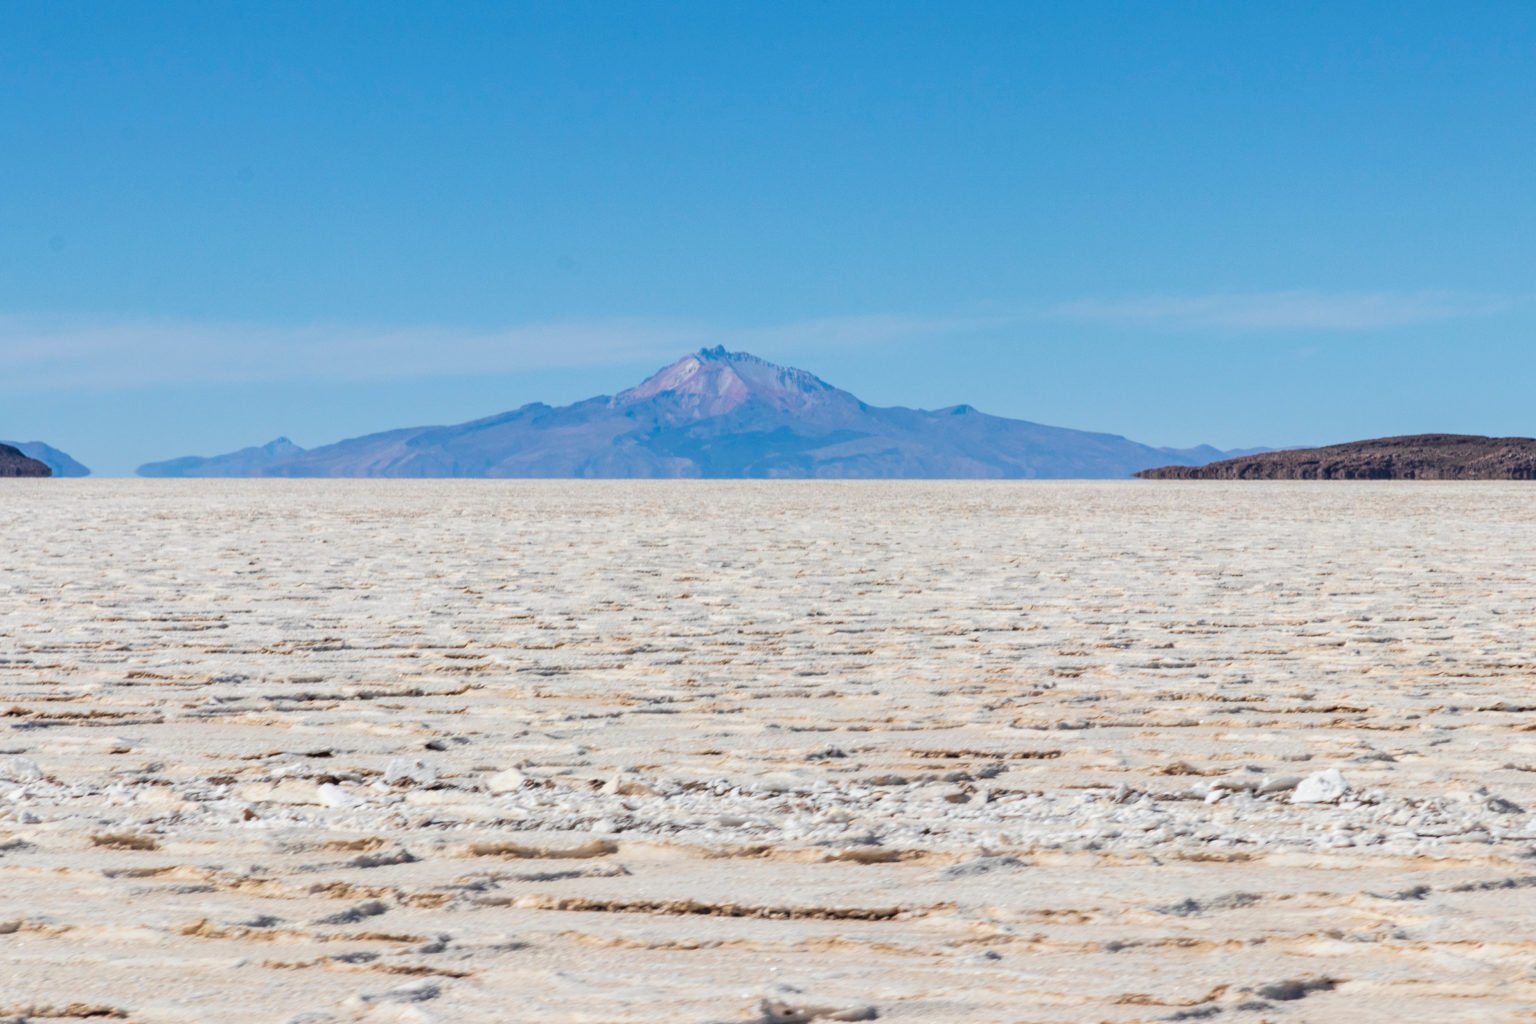 Chile moves ahead with public-private lithium model via Codelco